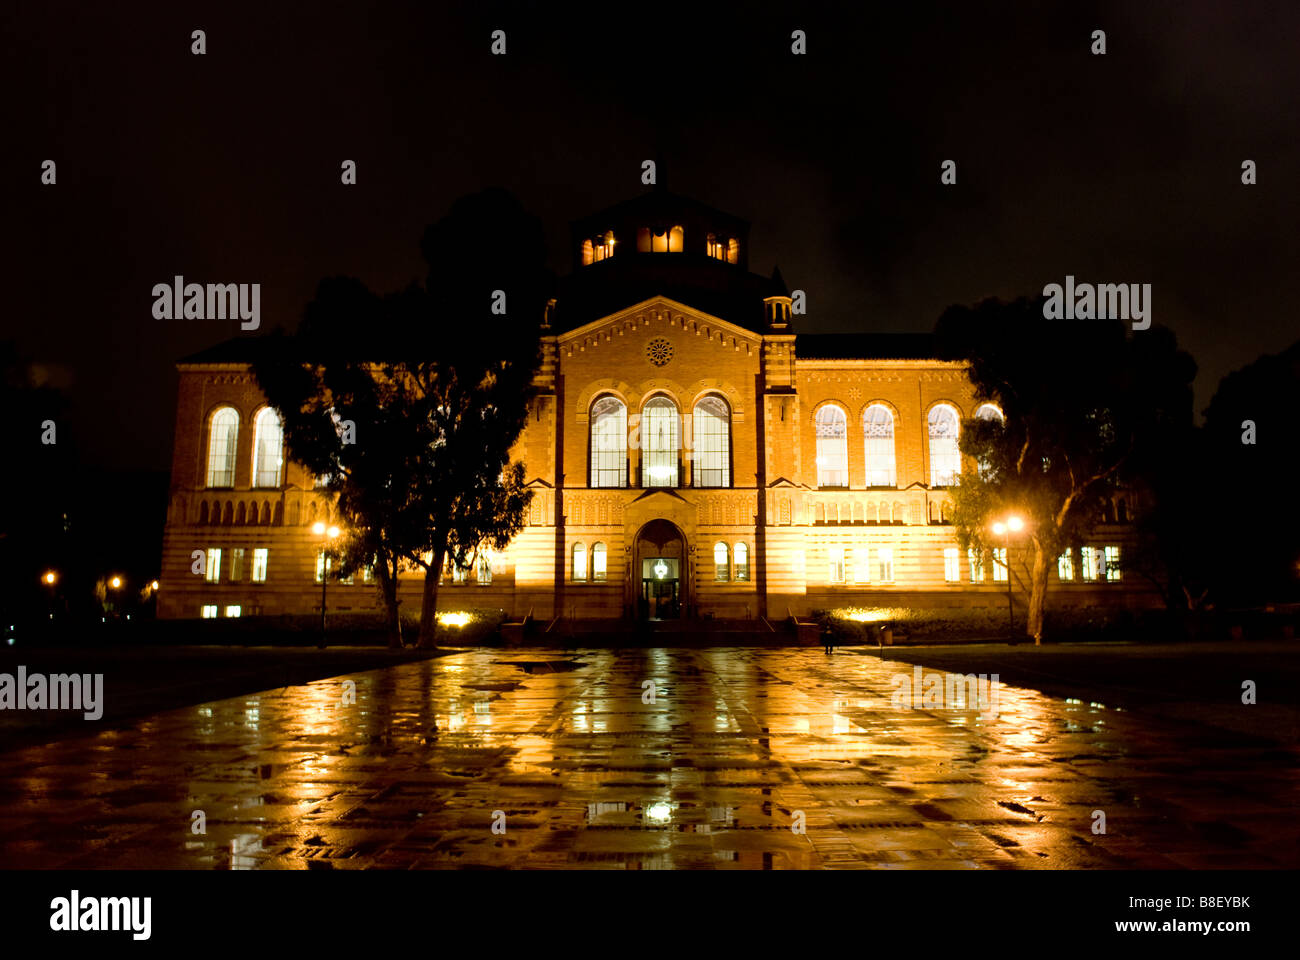 UCLA - University of California, Los Angeles at night, Powell Library Banque D'Images